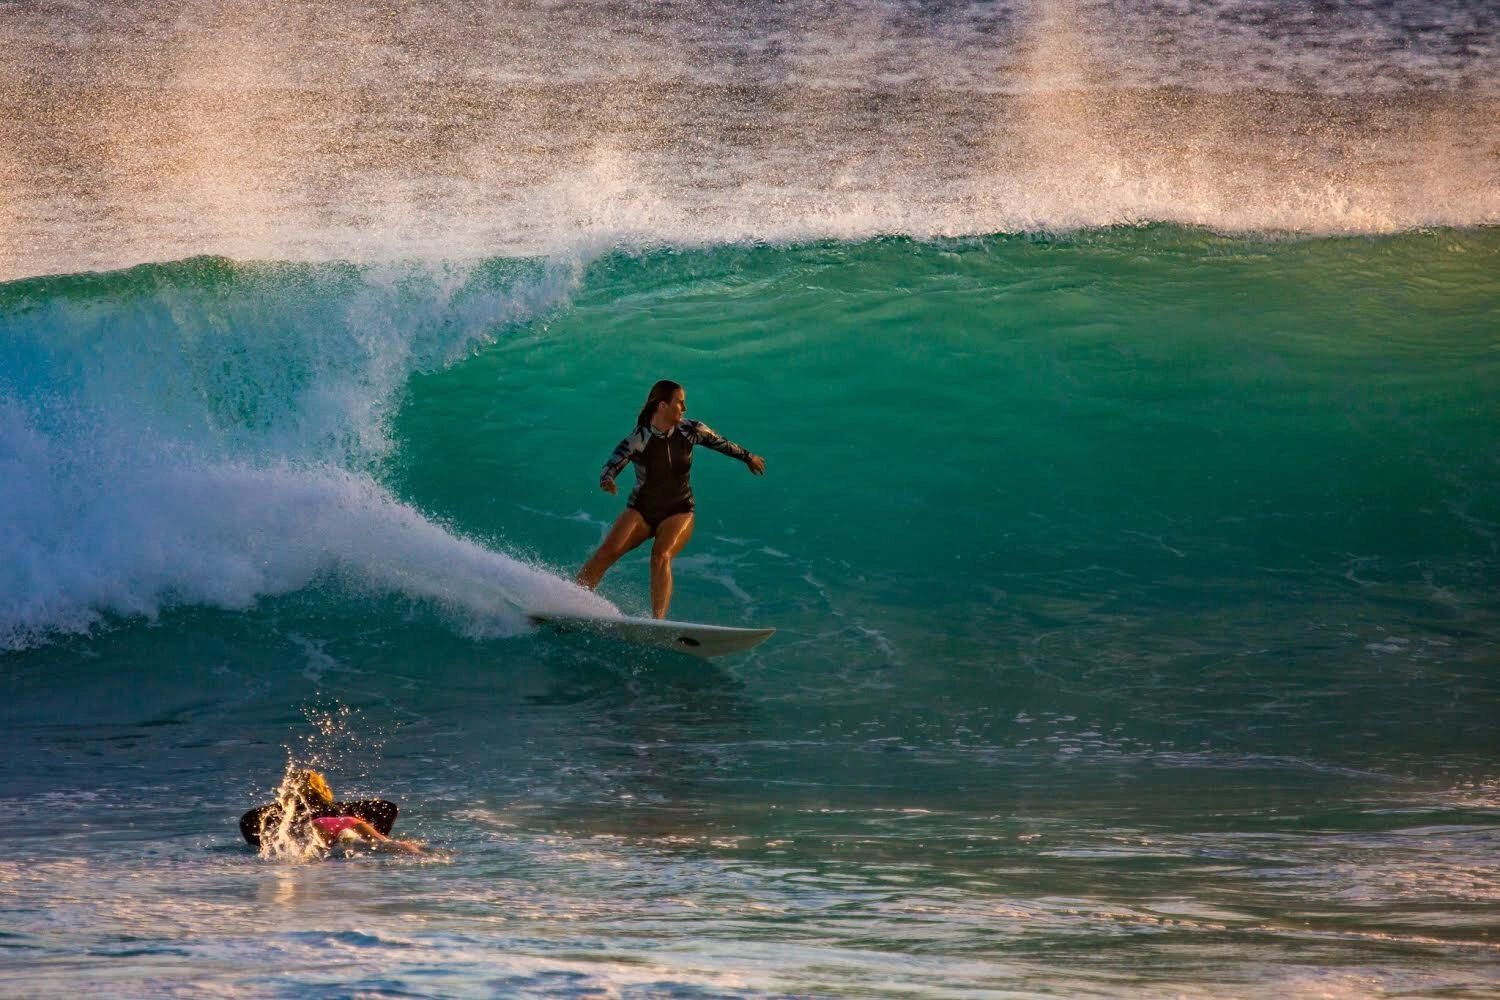 Female surfer going back side on a head high wave, determined to make the section